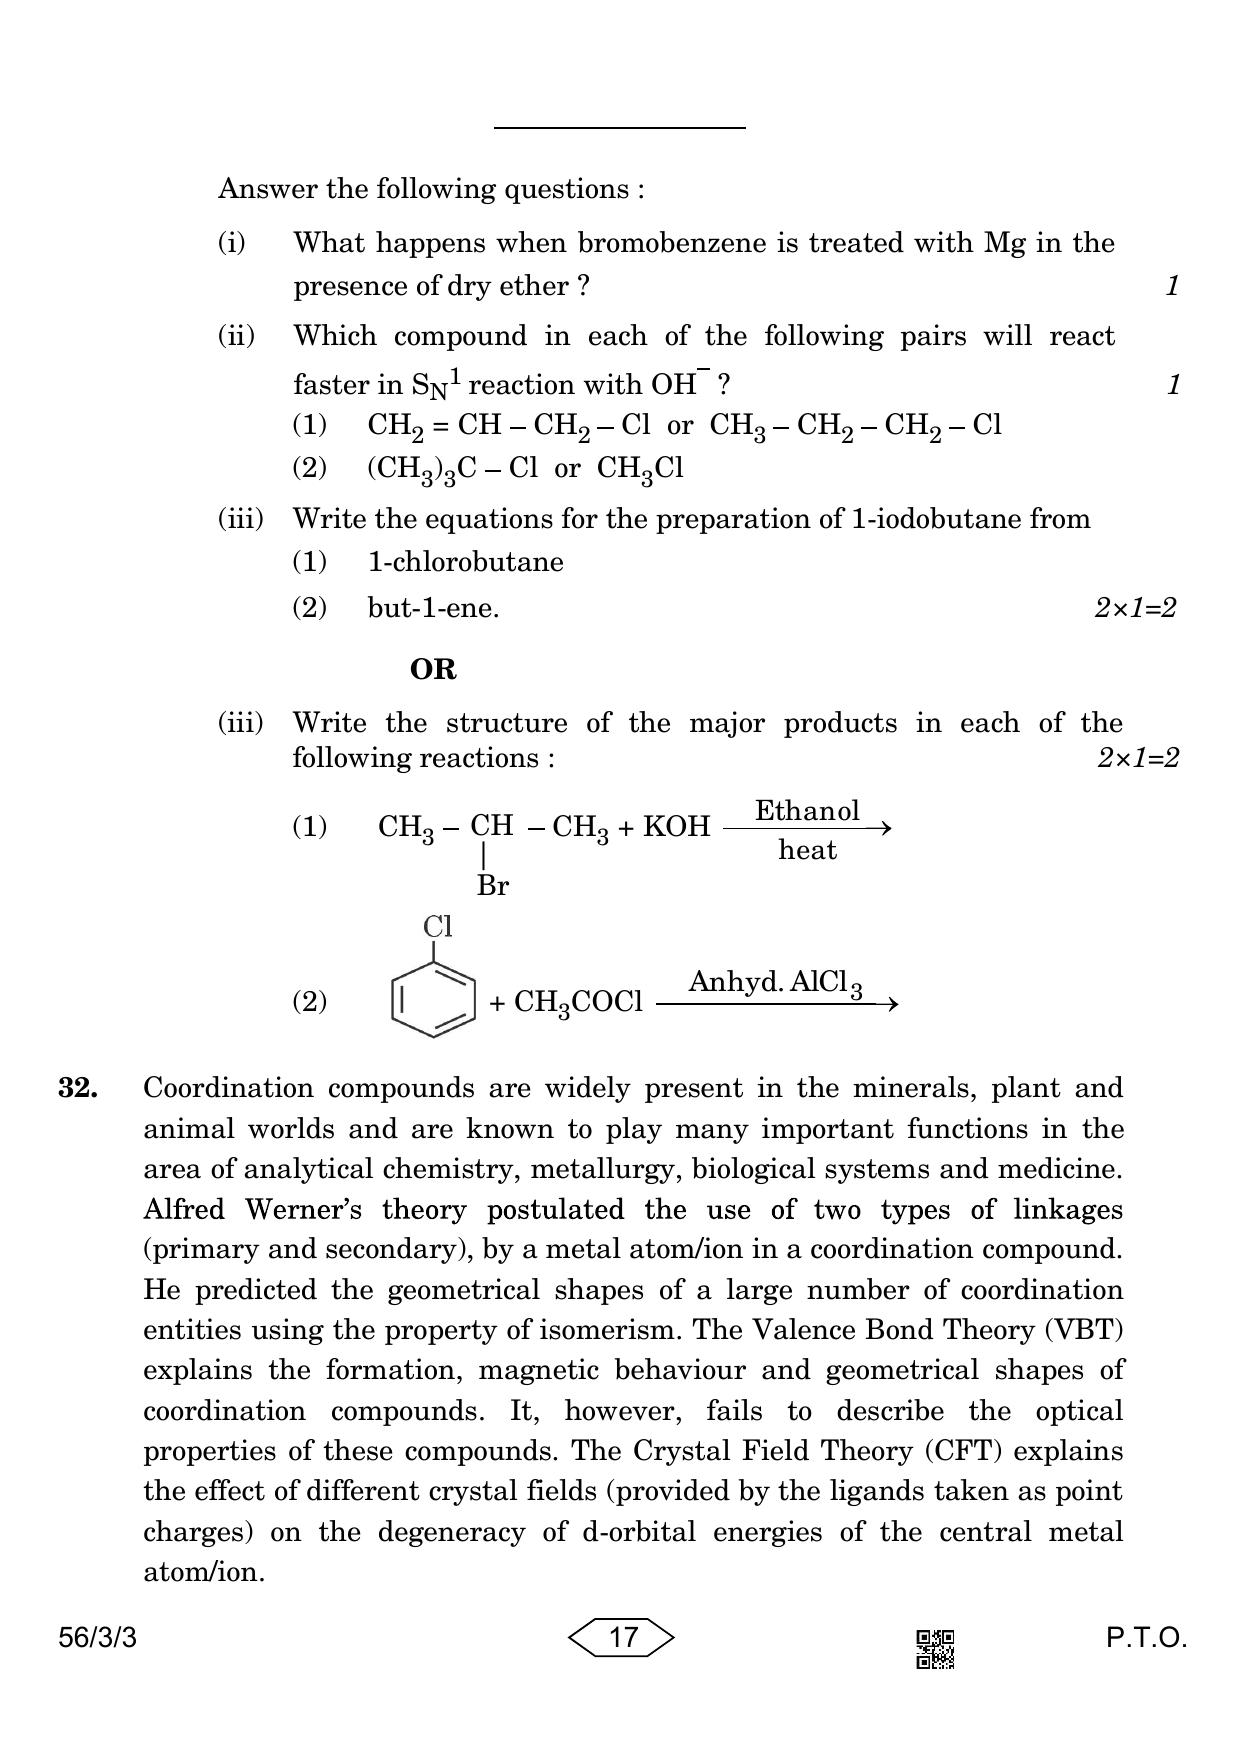 CBSE Class 12 56-3-3 Chemistry 2023 Question Paper - Page 17